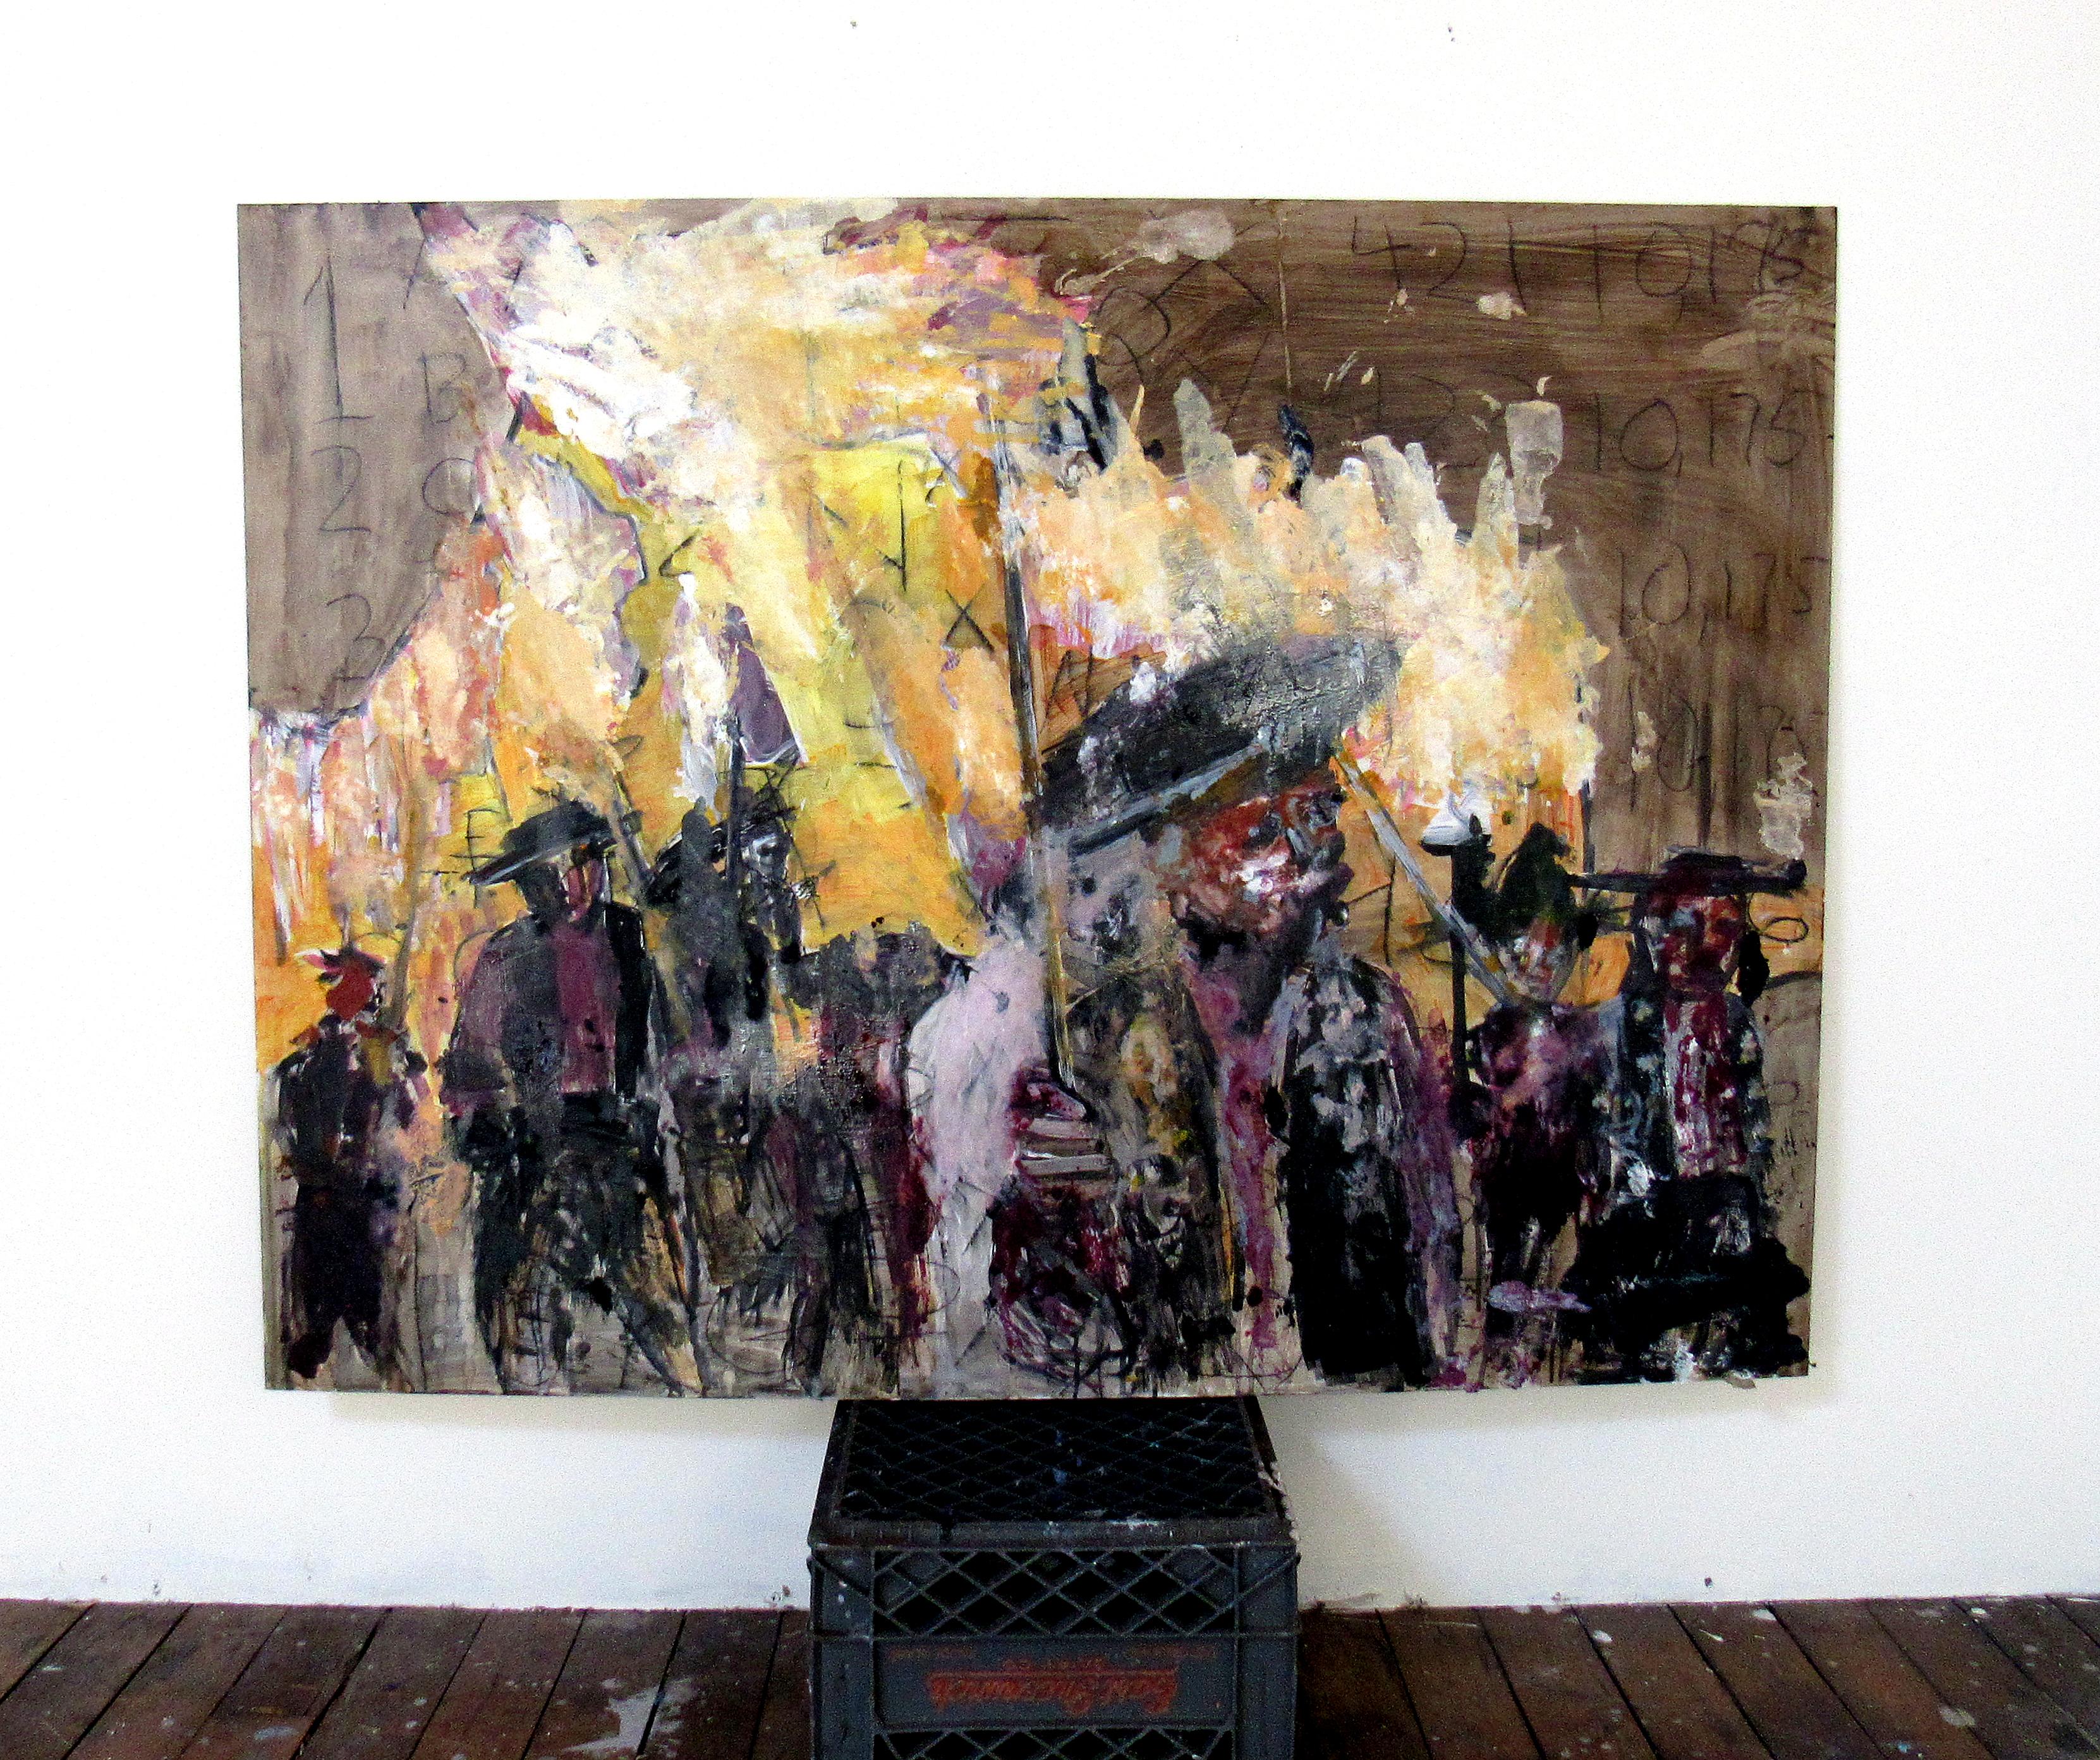 Lot, dramatic abstracted military theme, fire, multiple figures - Painting by C. Dimitri